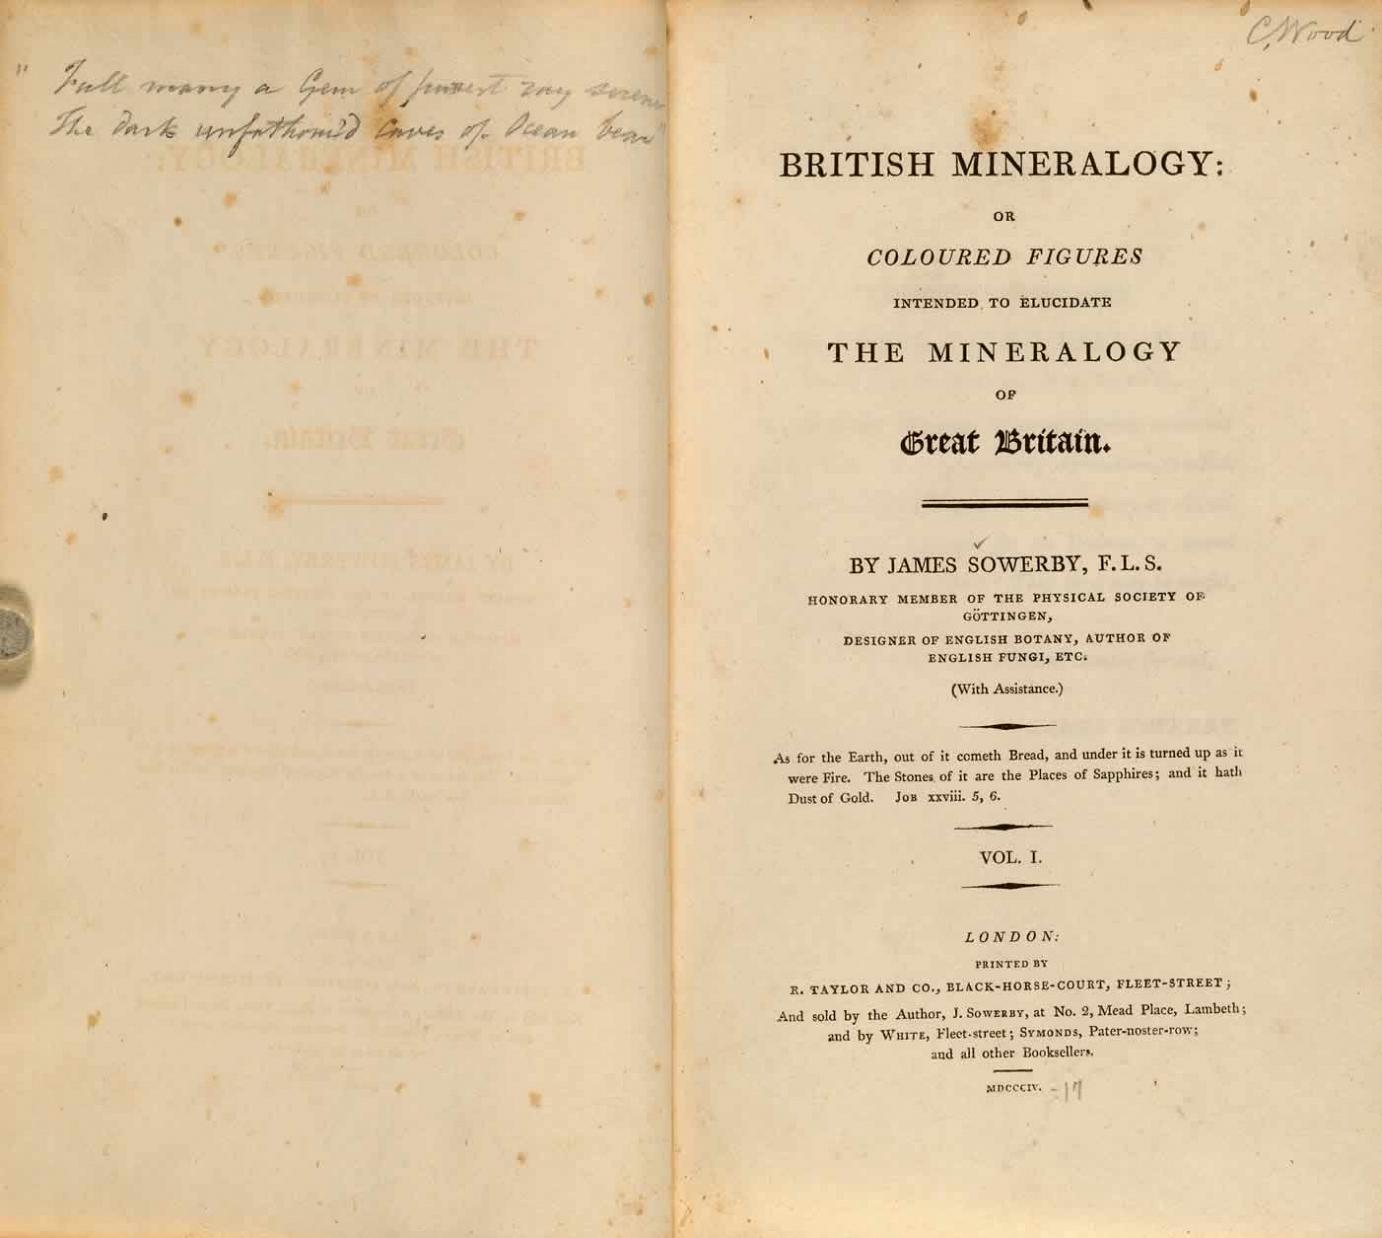 Title page photo from JAMES SOWERBY (1757 - 1822). <em>British Mineralogy: or Coloured Figures intended to elucidate the Mineralogy of Great Britain</em>. London: Printed by R. Taylor (volume 5 by Arding & Merrett) and sold by the Author, J. Sowerby, and by White, (1802-) 1804-1817.